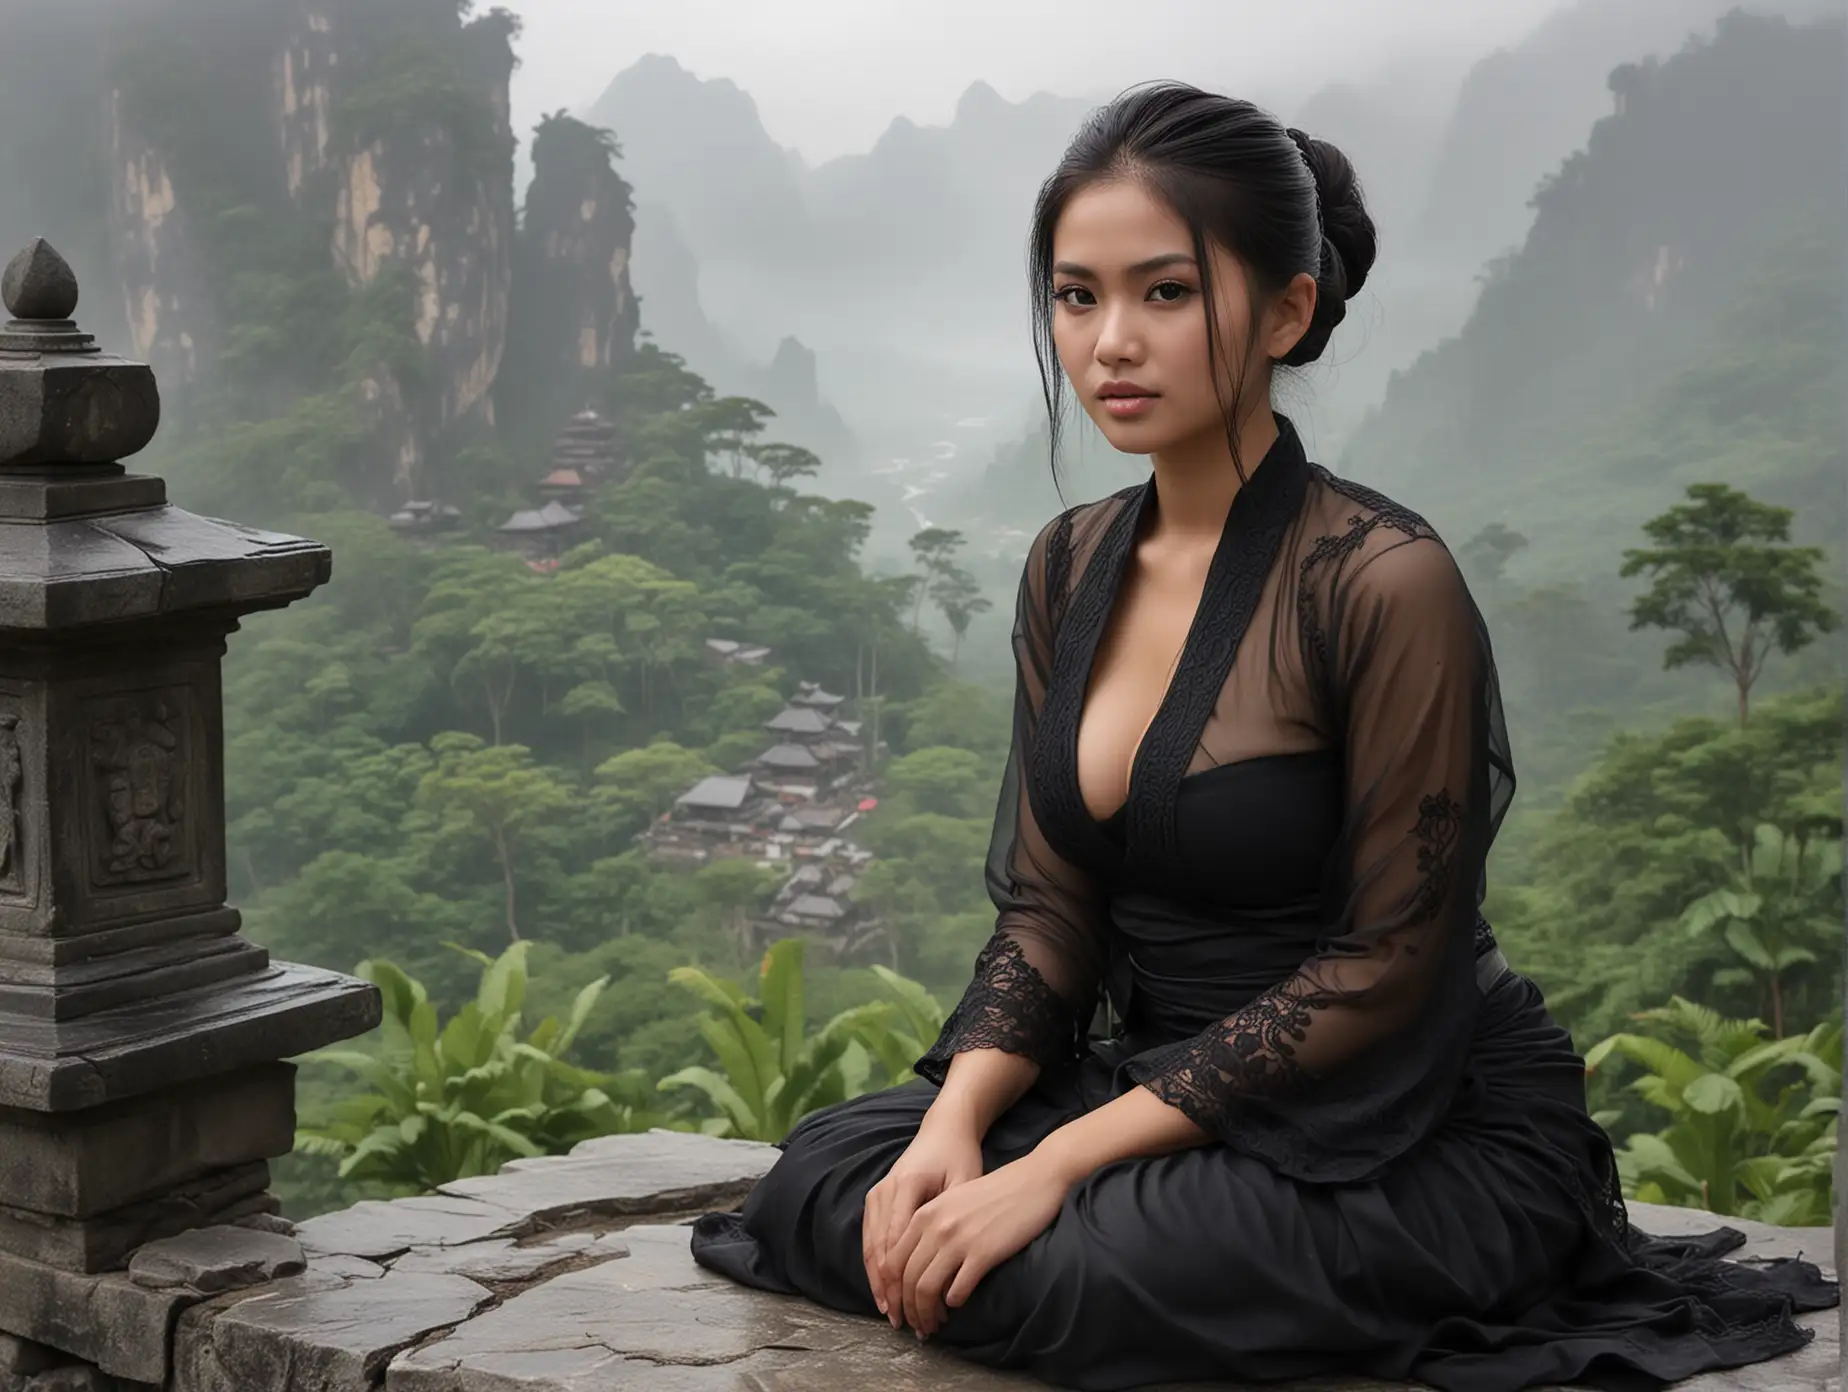  Indonesian woman (18 years old) with (hair tied up). Wearing a black kebaya. Sexy cleavage, She sits on a foggy Indonesian temple stone with a cloudy valley. Voluptuous, very realistic, voluptuous body

(Translation)
Attractive Indonesian woman (18 years old) with (her hair tied up). She is wearing a black kebaya. Revealing cleavage, she sits on a foggy Indonesian temple stone with a cloudy valley. Voluptuous, very realistic, voluptuous body.